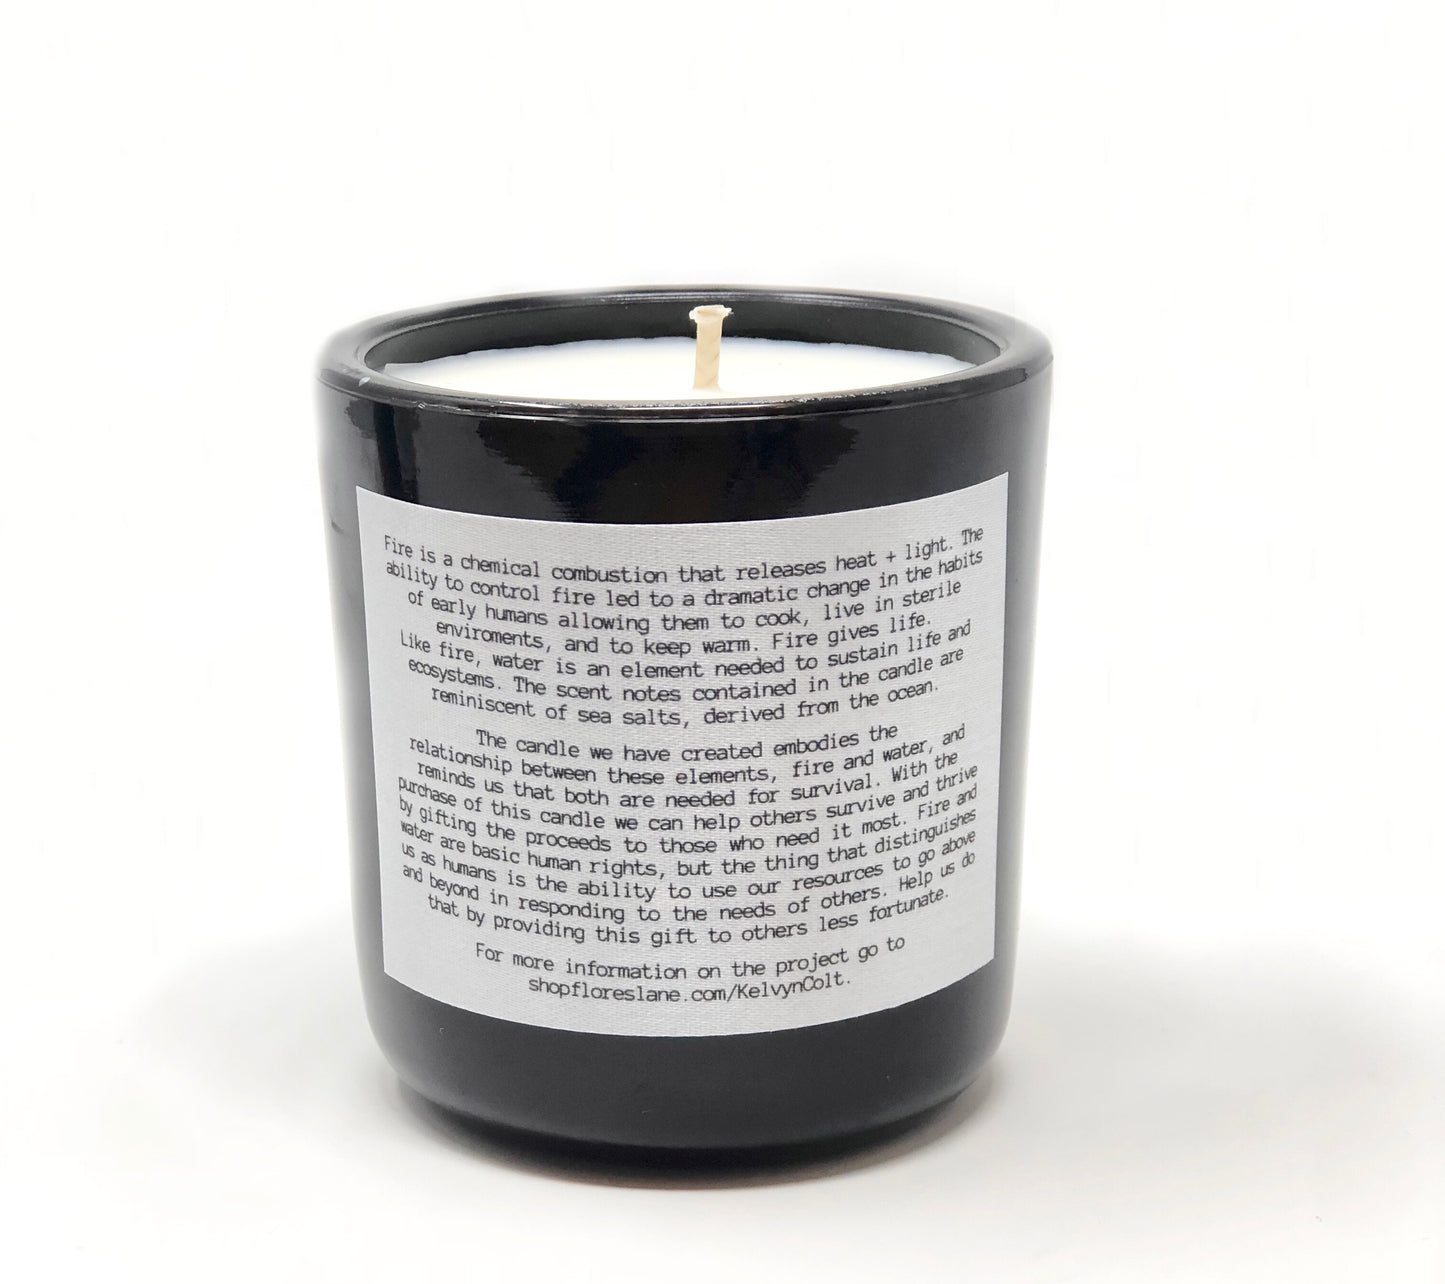 The back of the candle has an explanation as to how we came up with the concept using a candle for causes as well as the scent it contains.